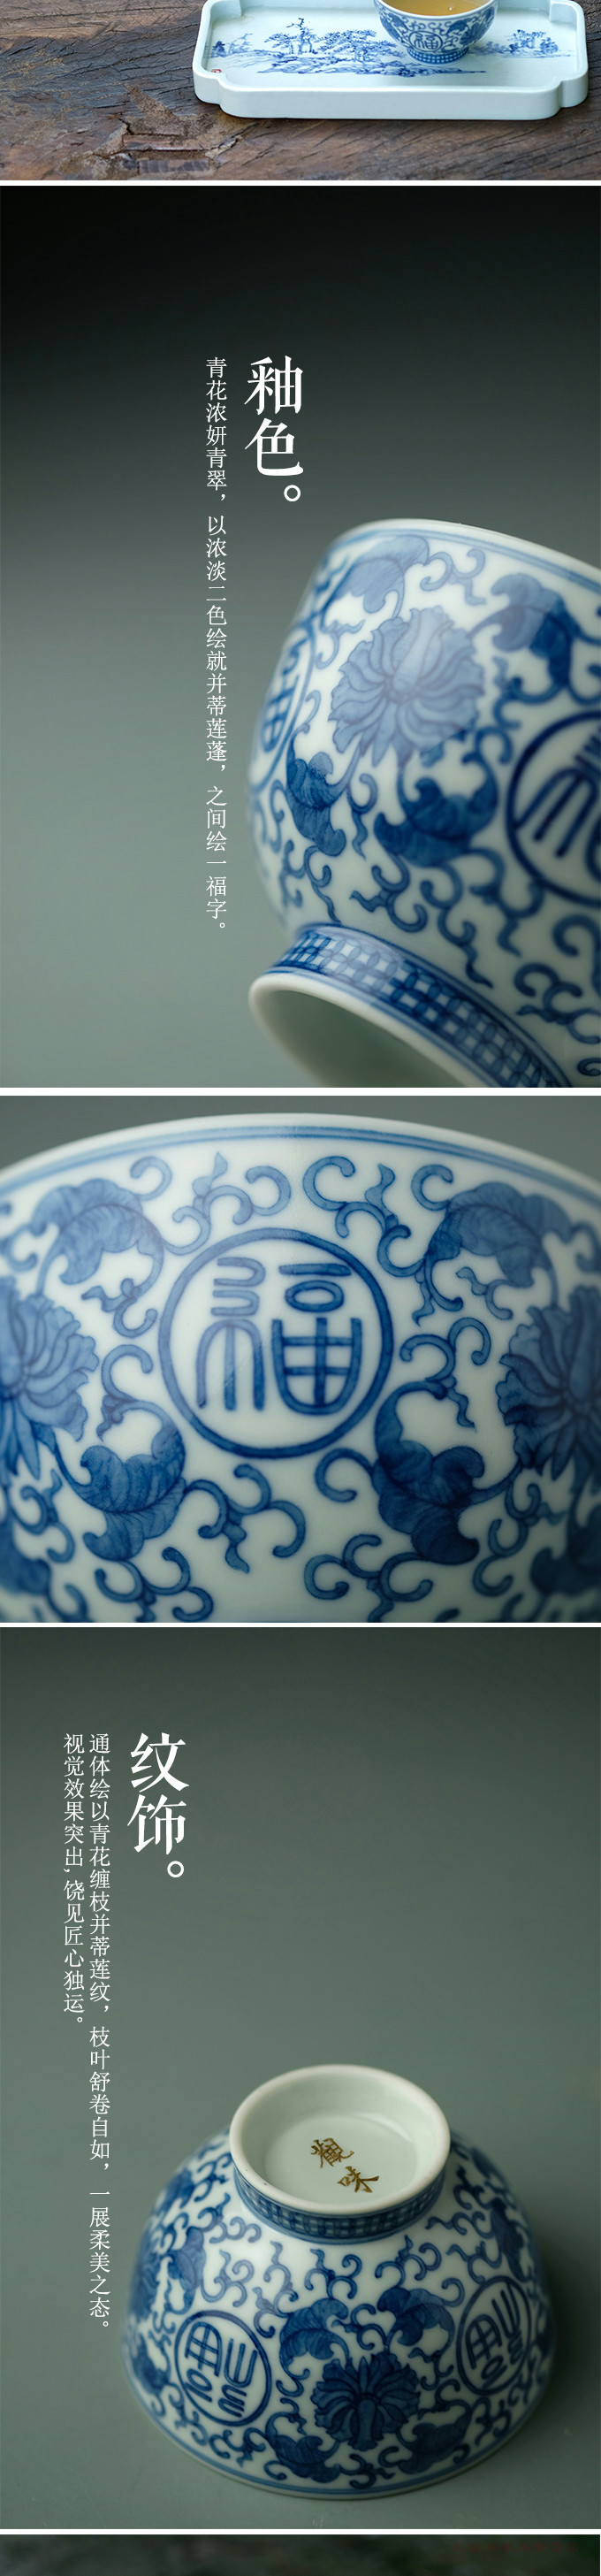 Offered home - cooked in blue and white tie up branch bound branch cncondom wufu masters cup of jingdezhen ceramic cup tea service master